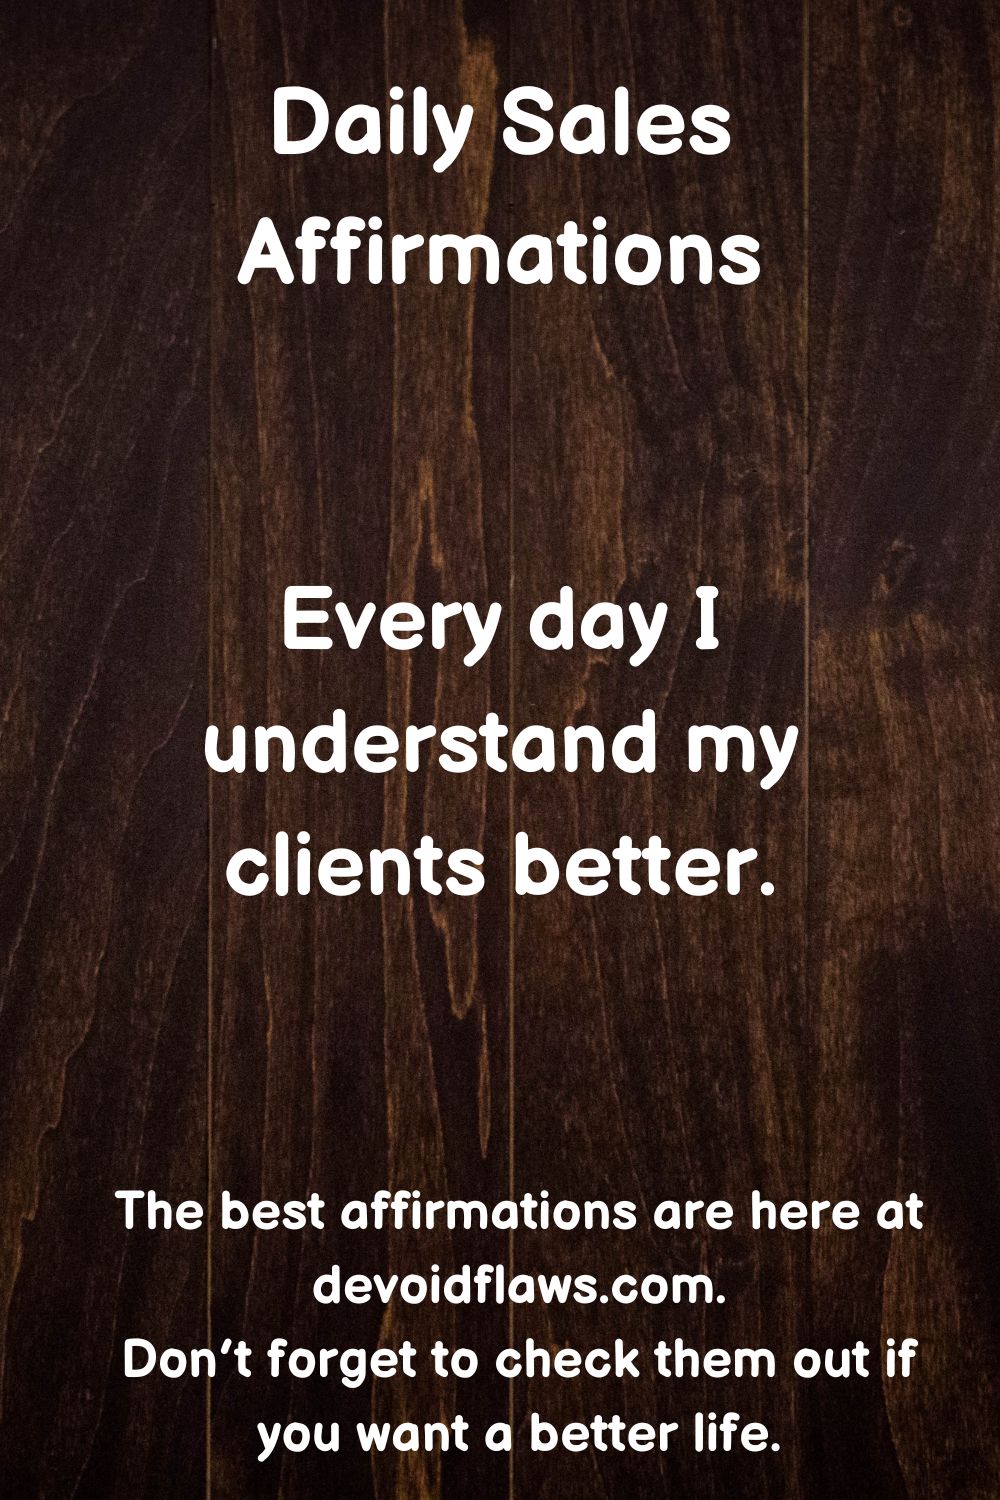 daily sales affirmations